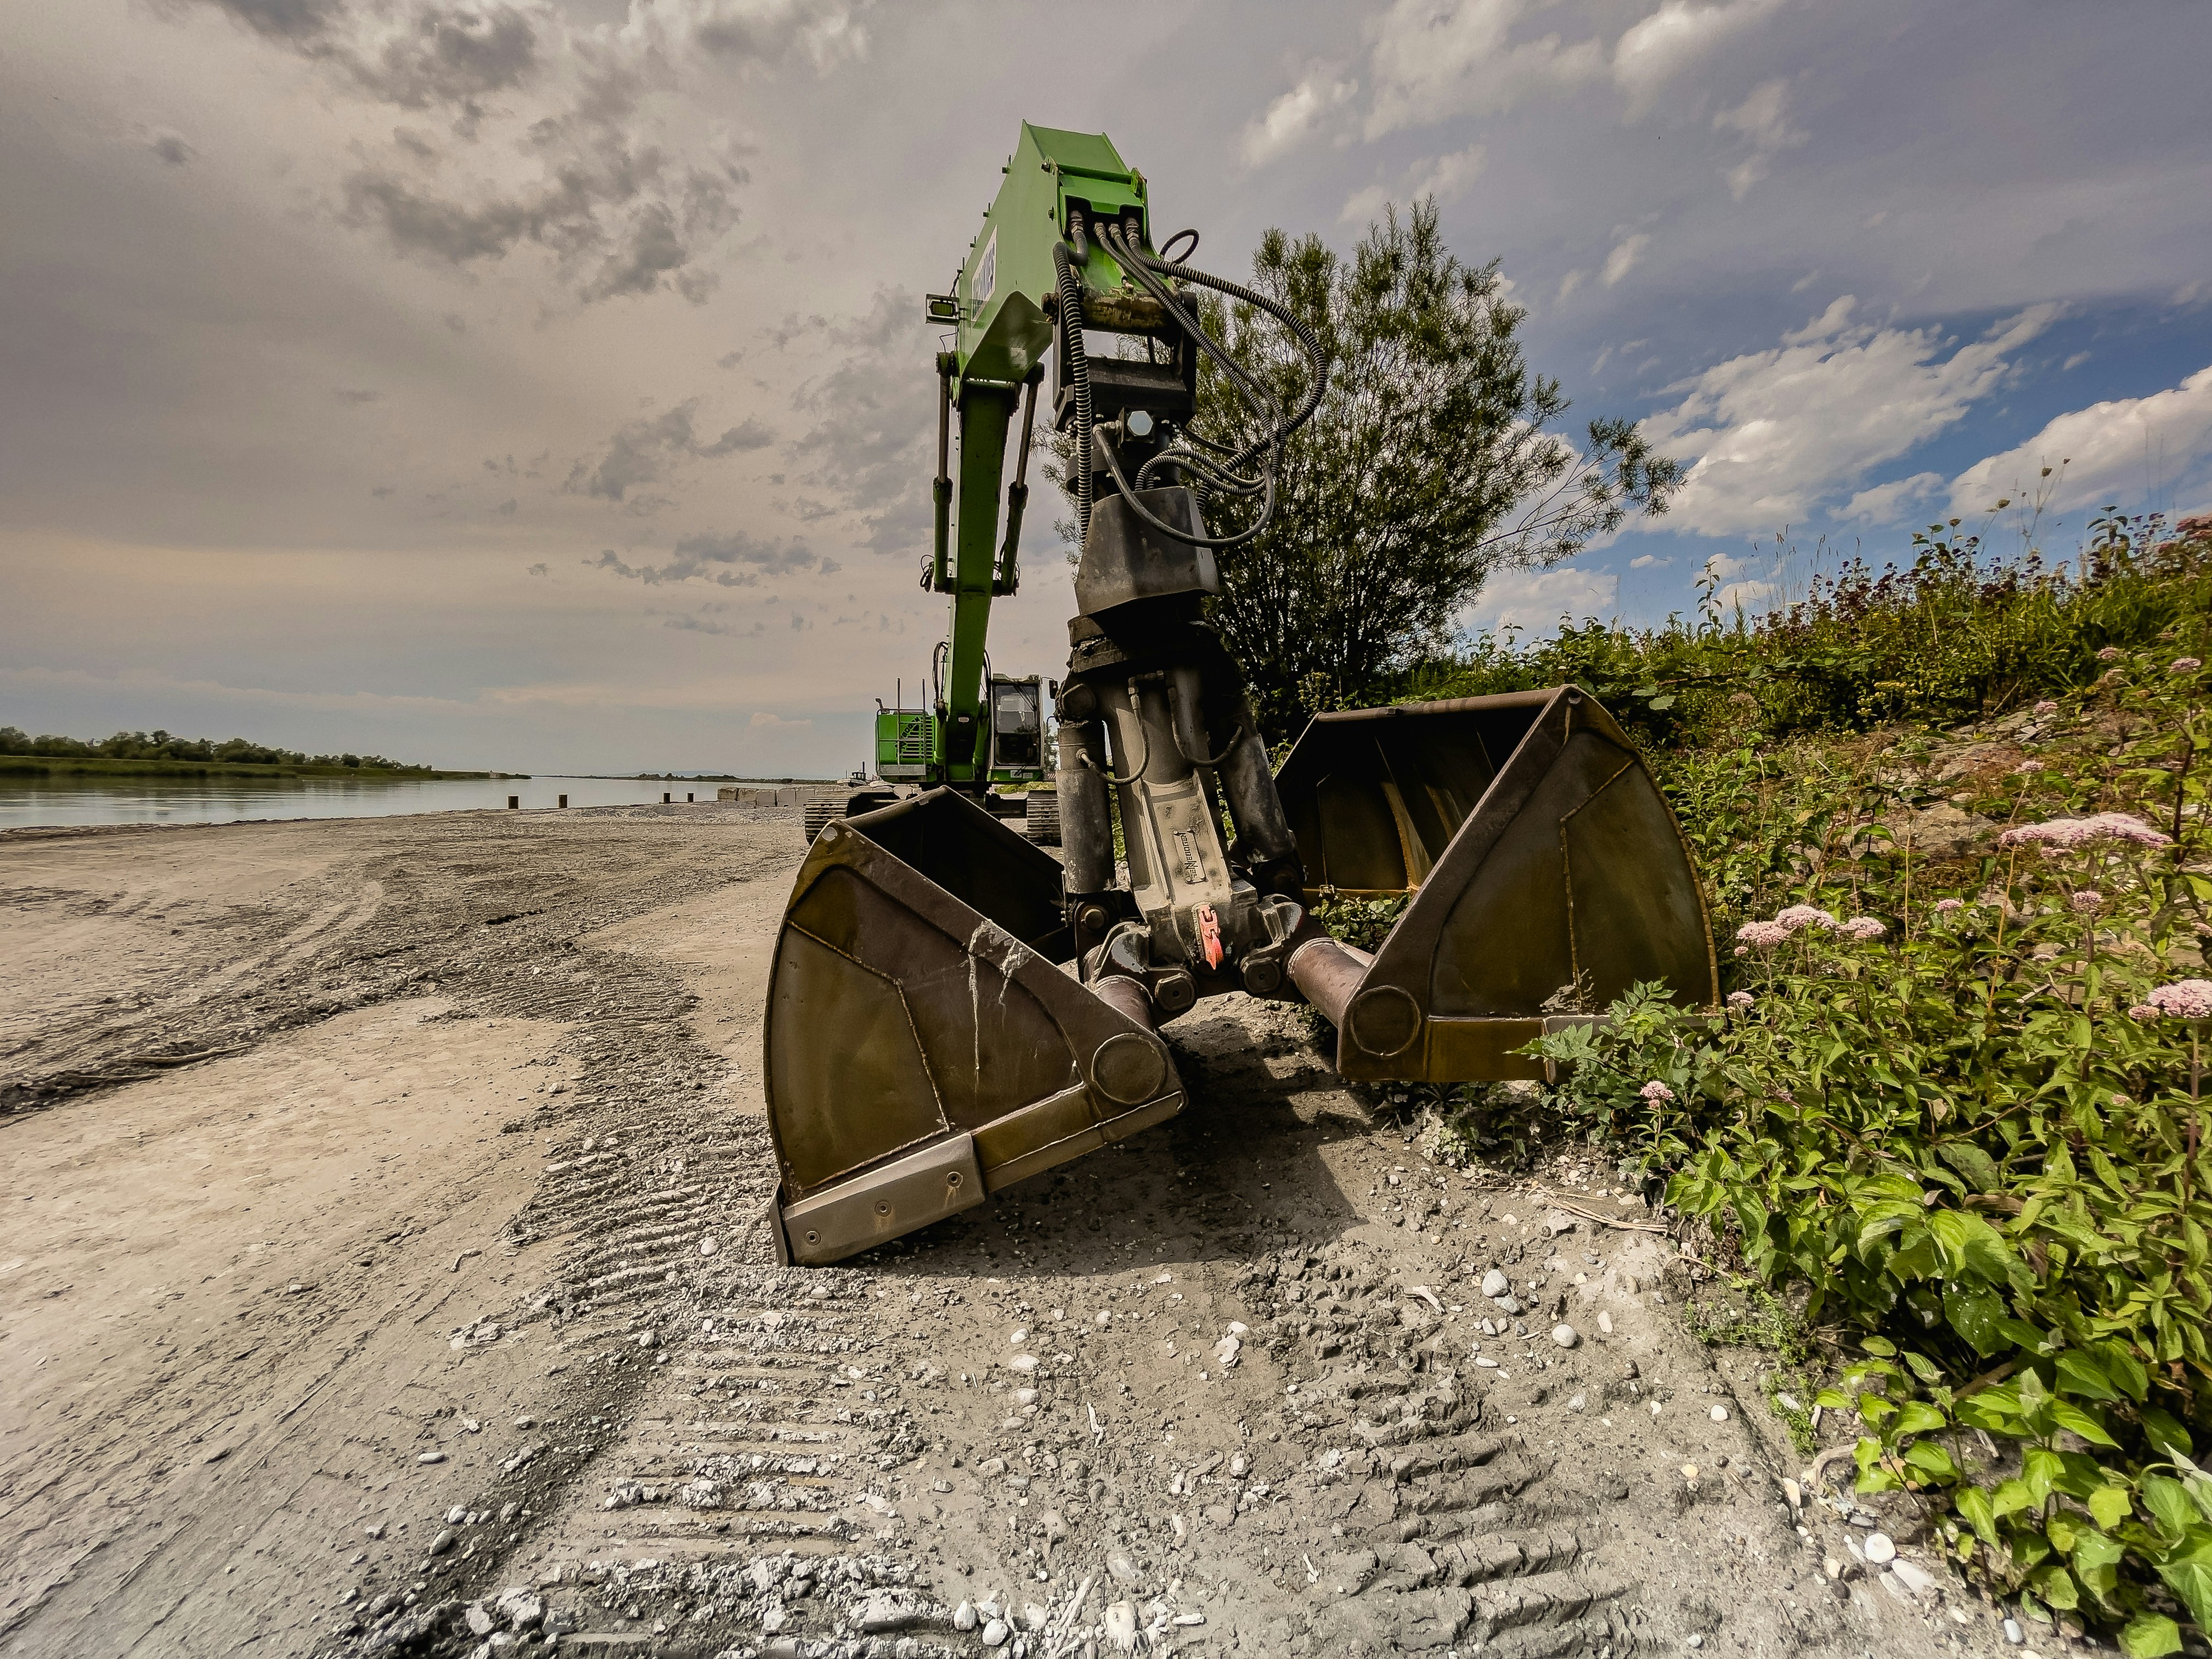 green and brown heavy equipment on gray sand under gray cloudy sky during daytime